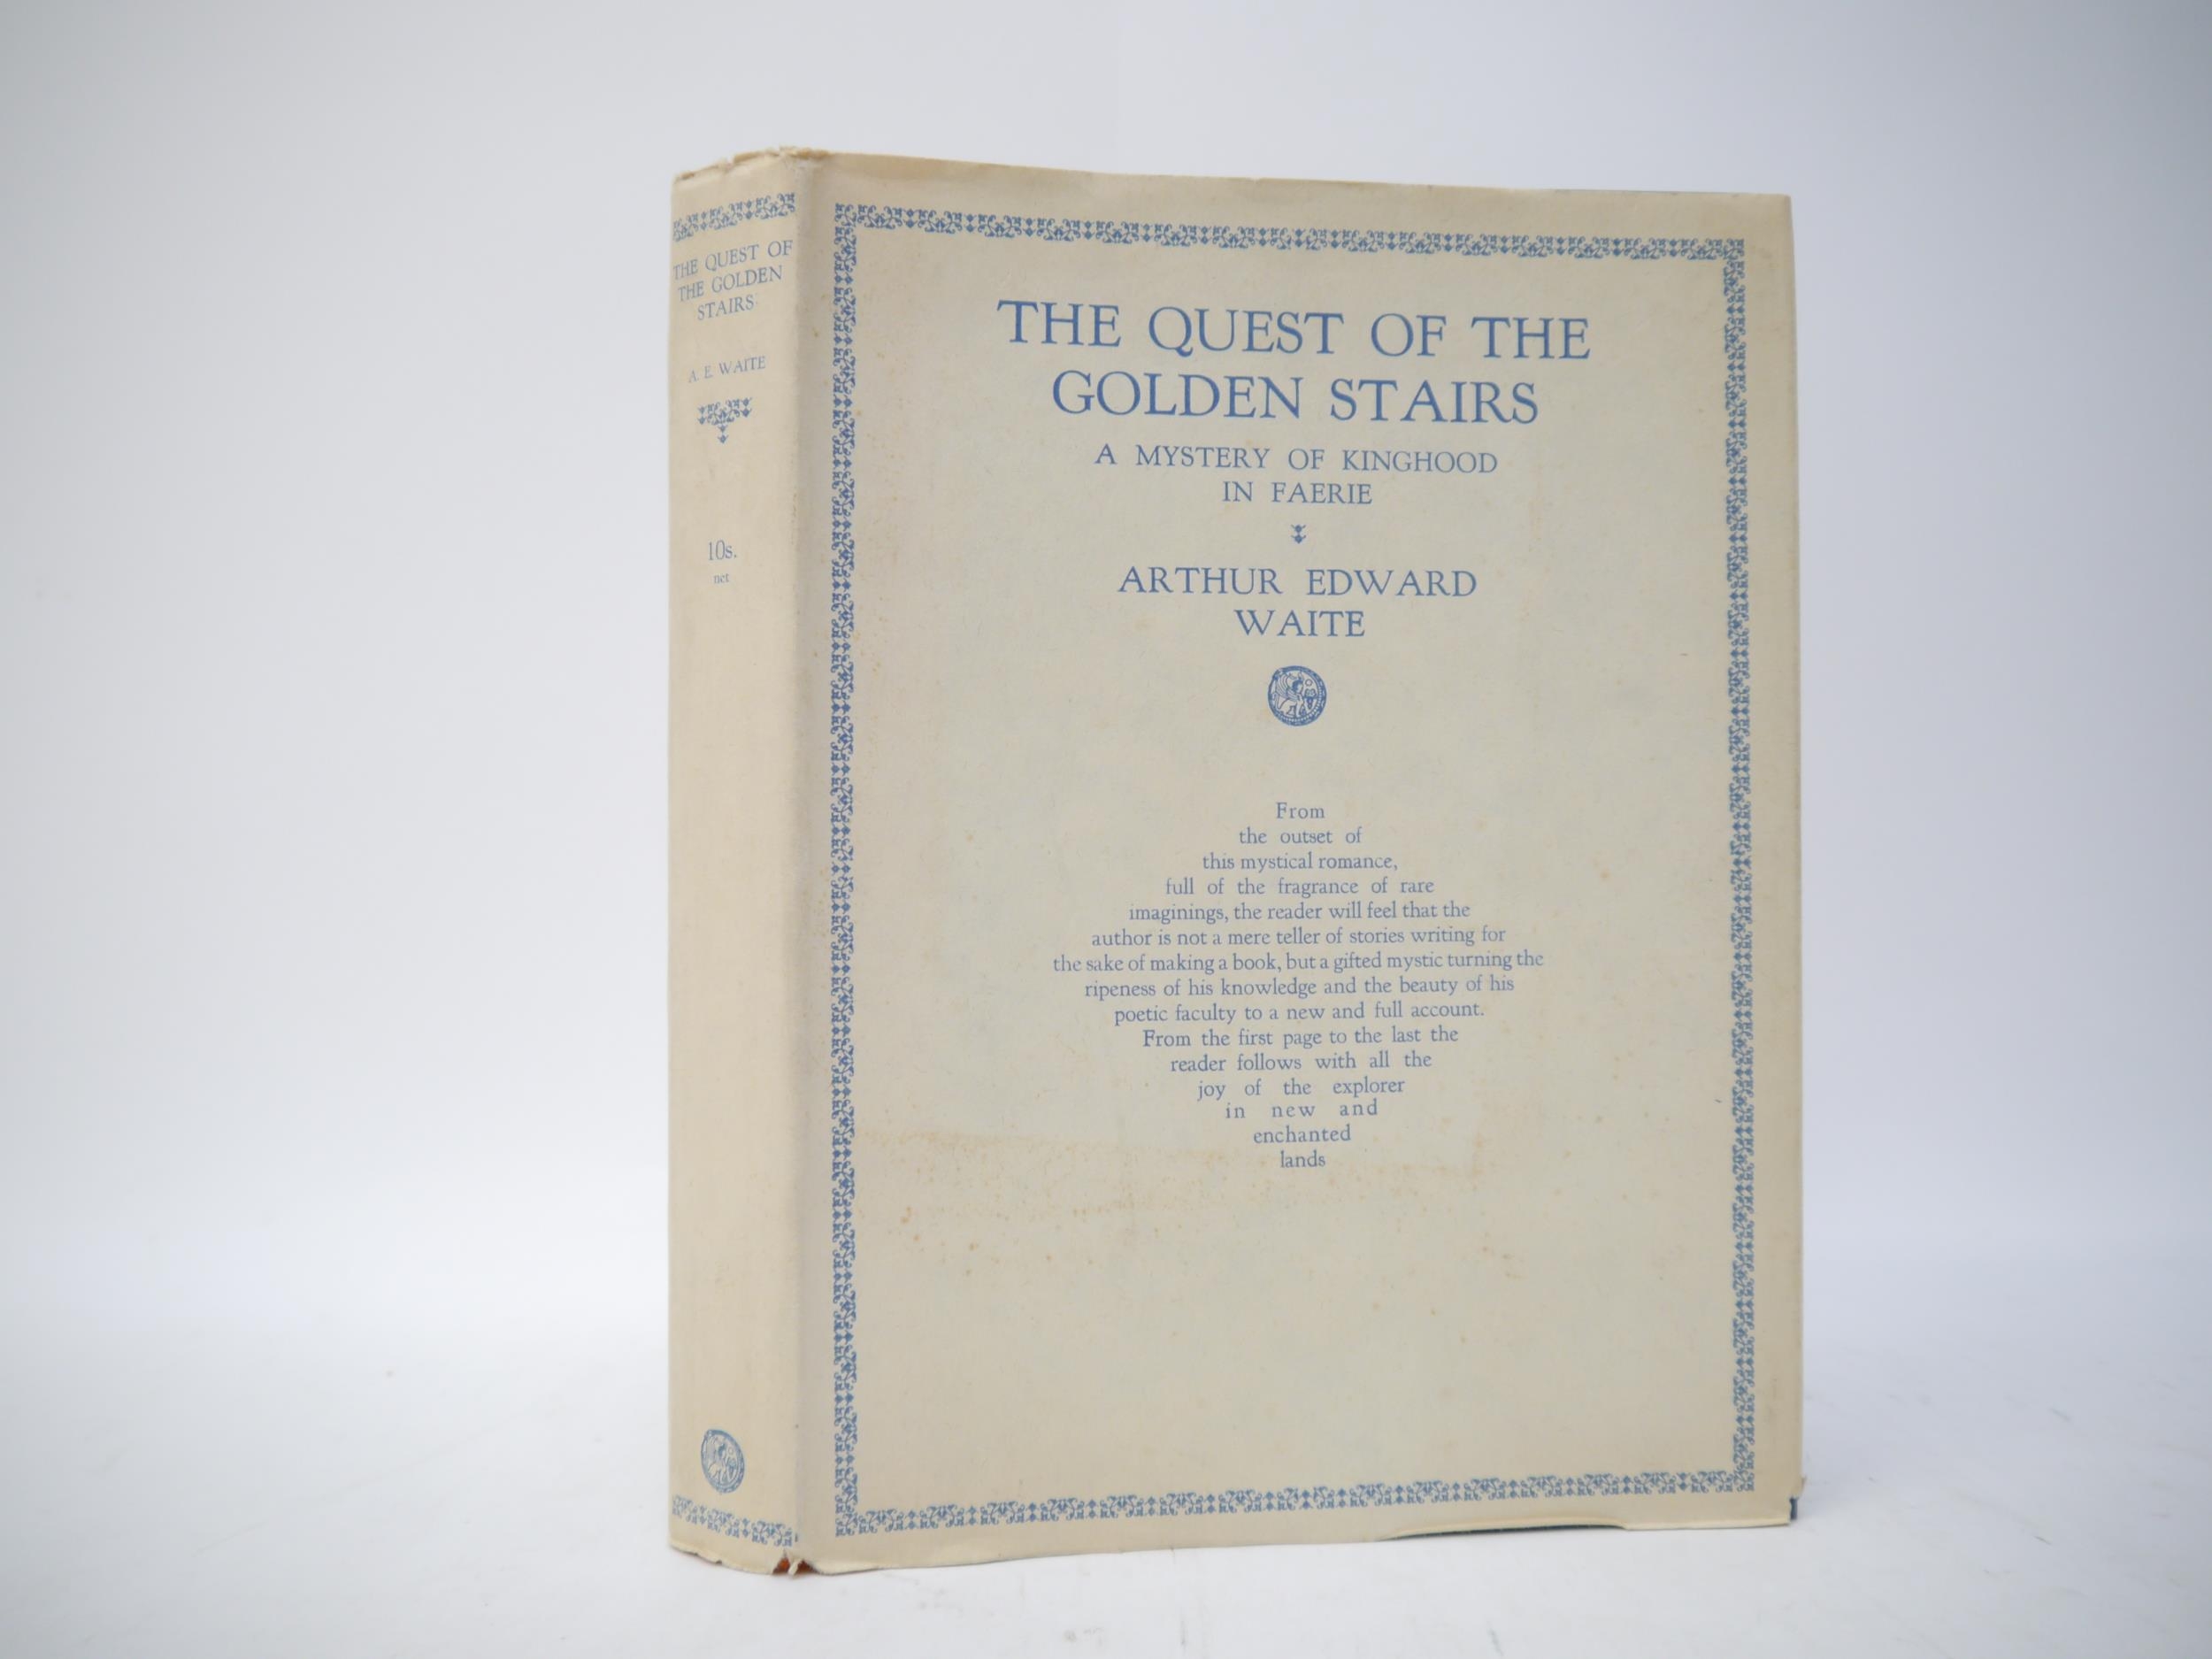 (Fantasy, Esoteric, Mystical), Arthur Edward Waite: 'The Quest of the Golden Stairs. A Mystery of